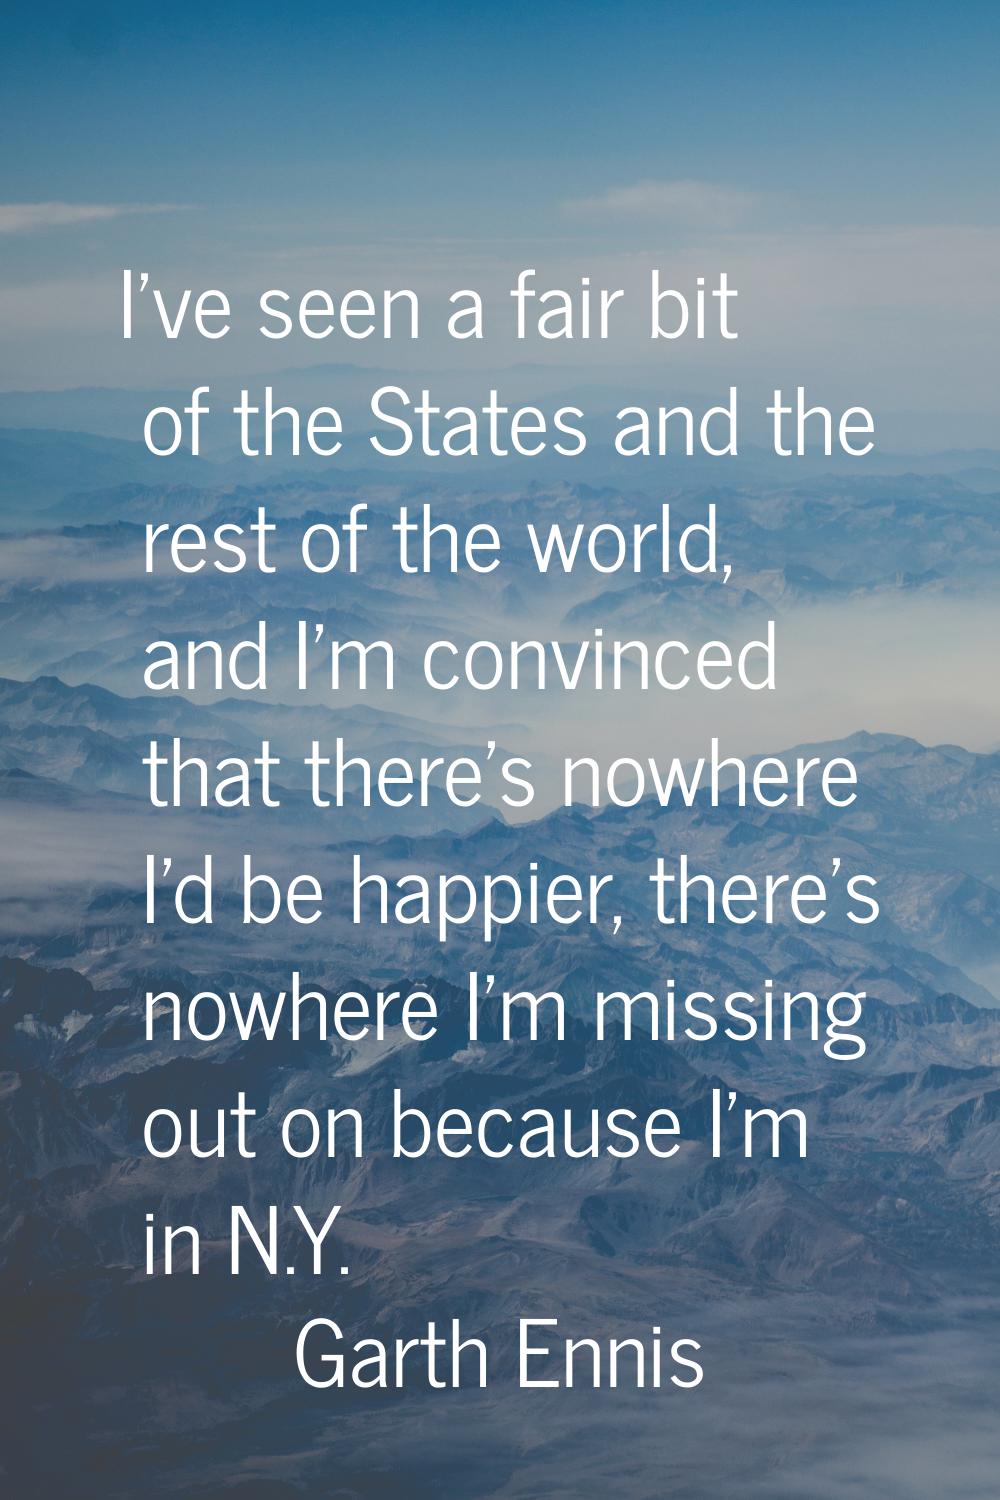 I've seen a fair bit of the States and the rest of the world, and I'm convinced that there's nowher